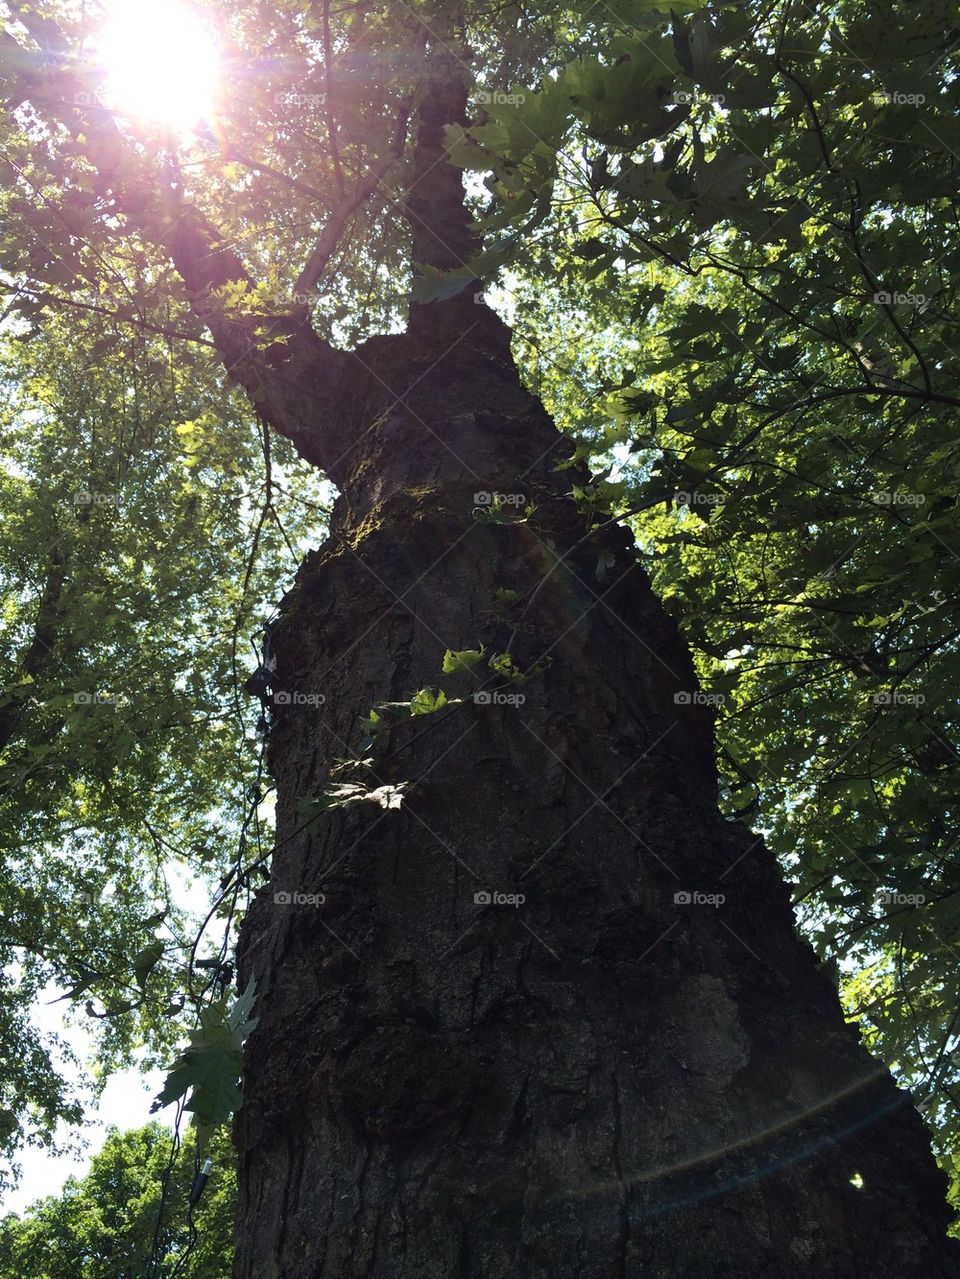 Tree with open arms